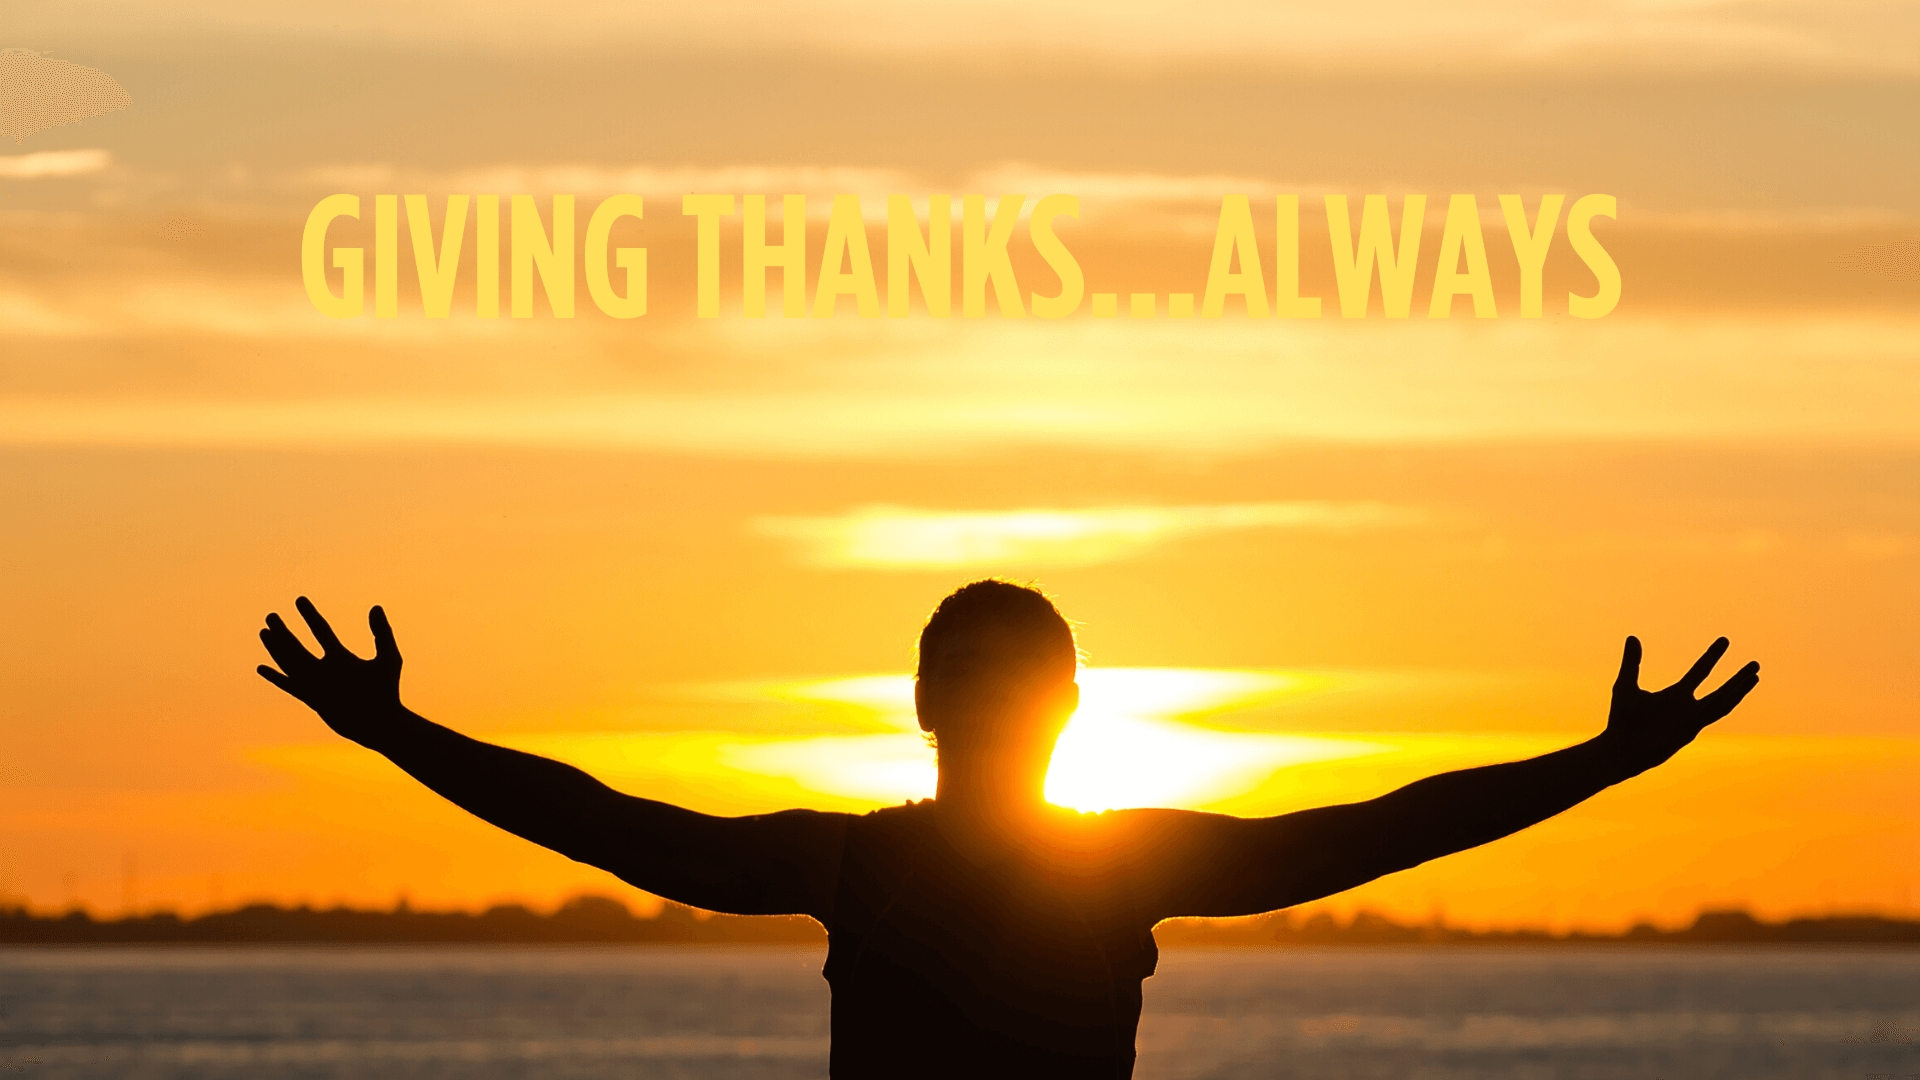 GIVING THANKS ALWAYS